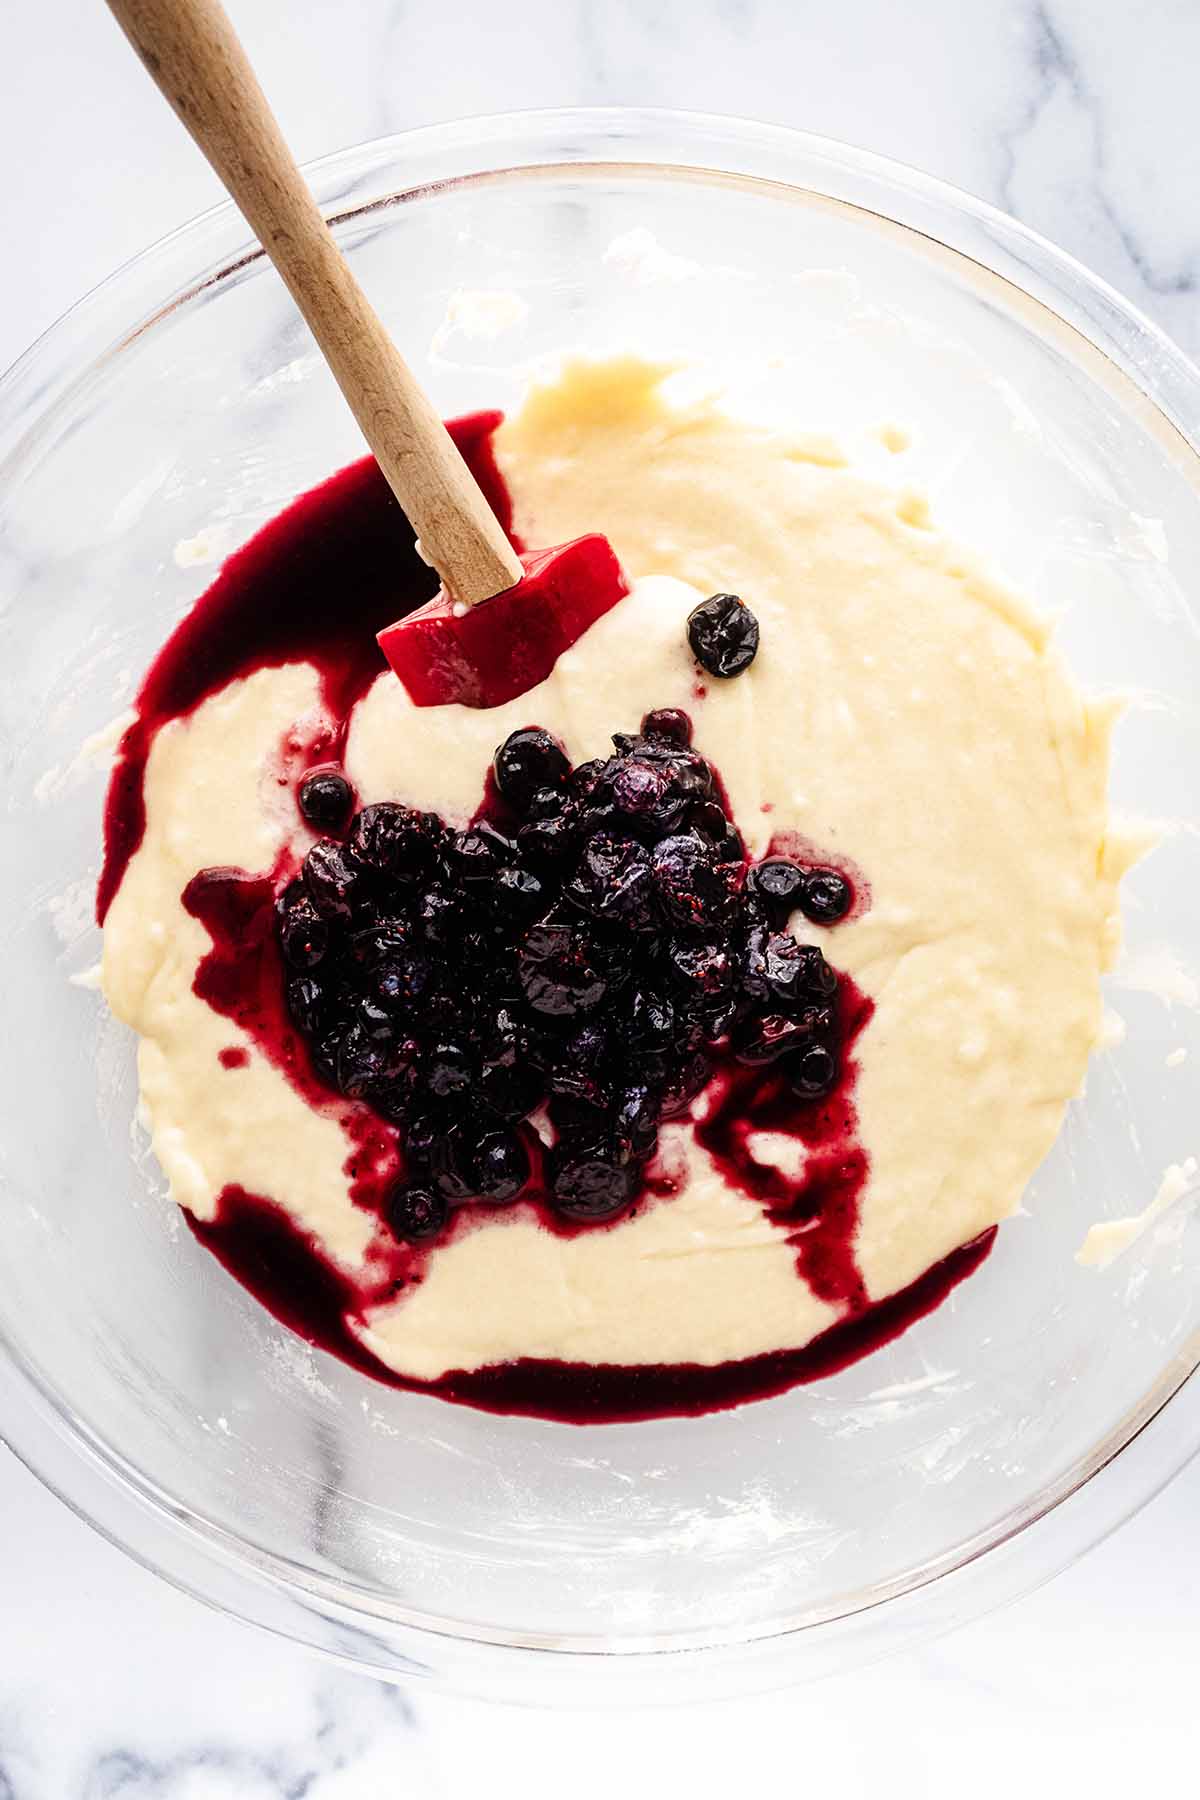 Overhead view of crushed blueberries in muffin batter with a red spatula in a glass bowl